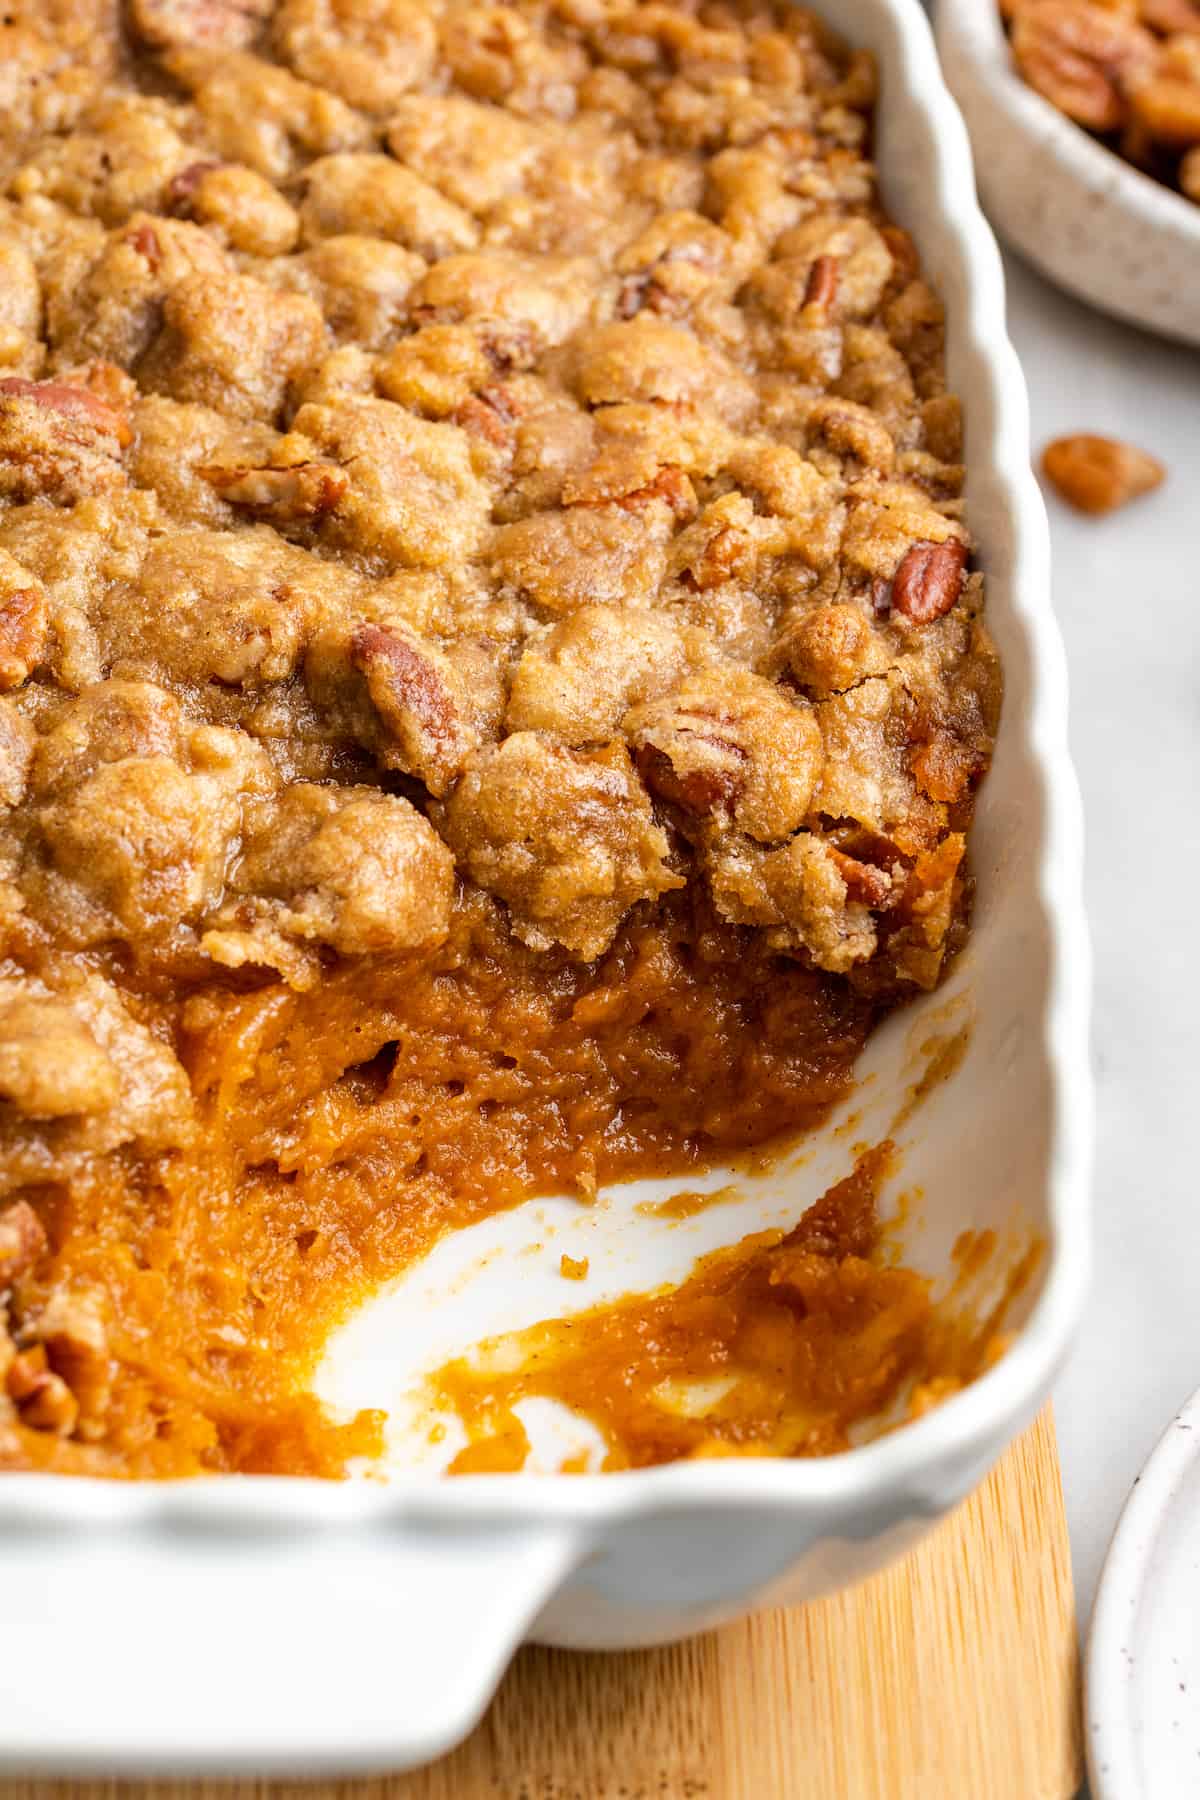 A sweet potato soufflé in a casserole dish, with the corner piece missing